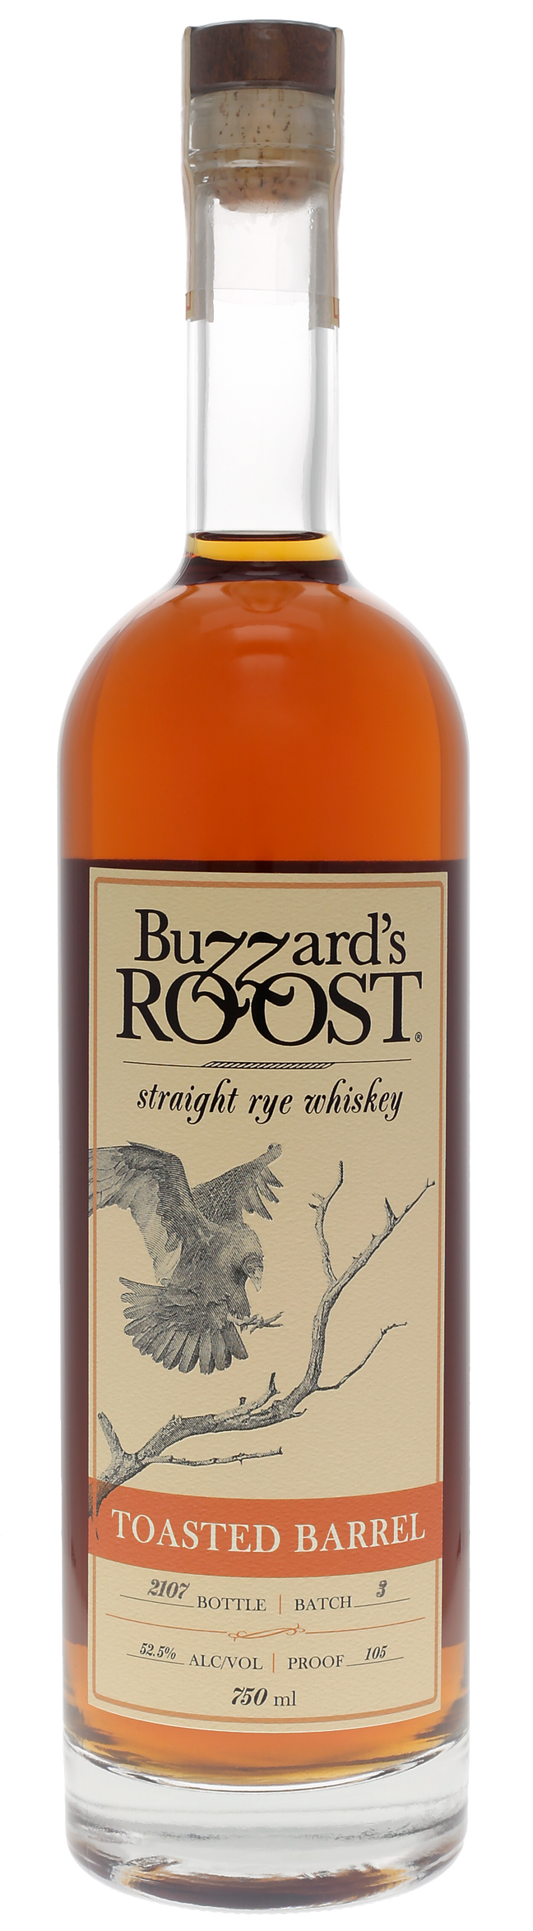 Buzzard's Roost Toasted Barrel Rye